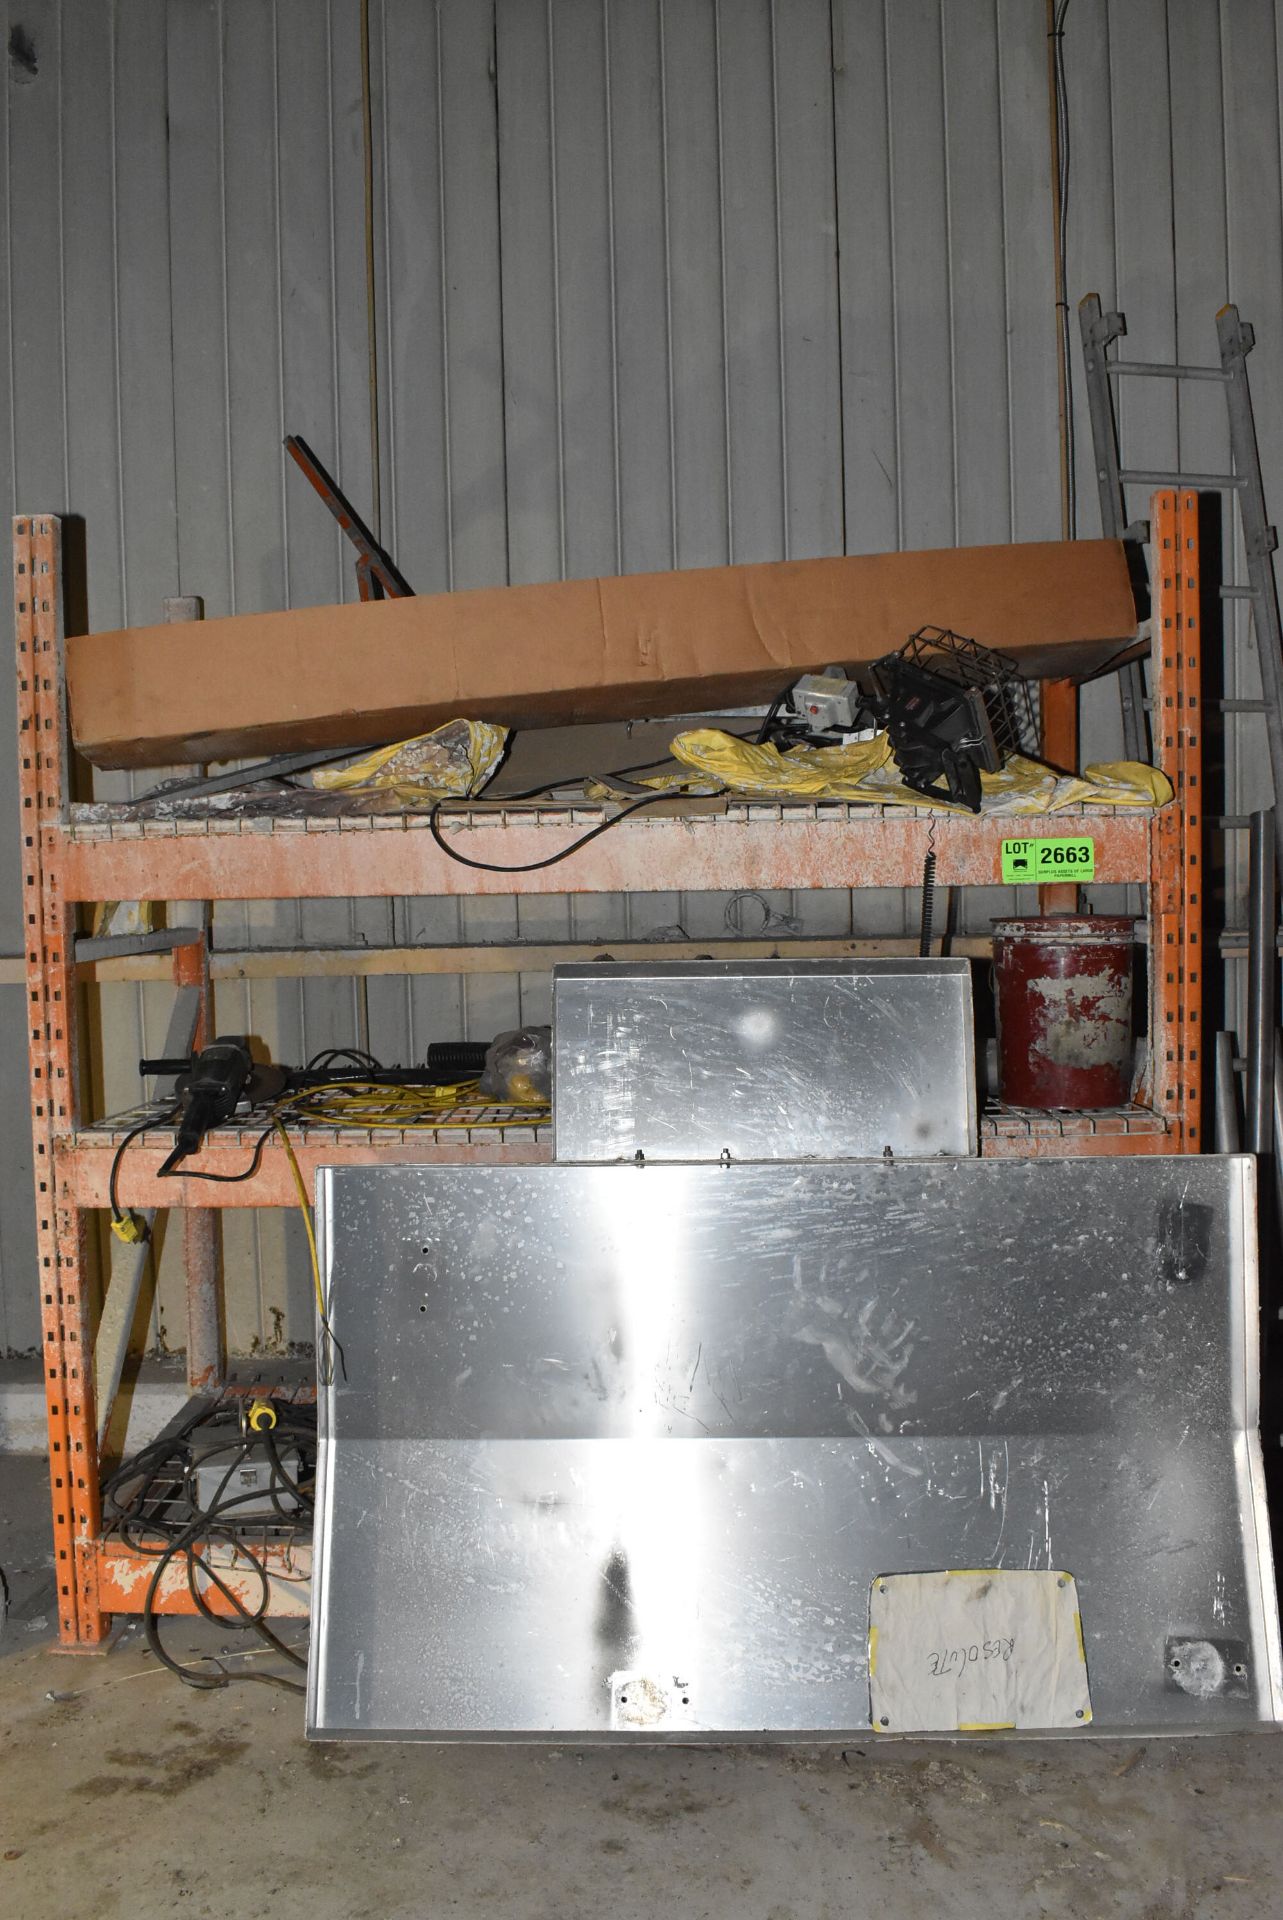 LOT/ PALLET RACK WITH CONTENTS - INCLUDING TOOLS, SHOP SUPPLIES, SAFETY LIGHTS, STAINLESS STEEL